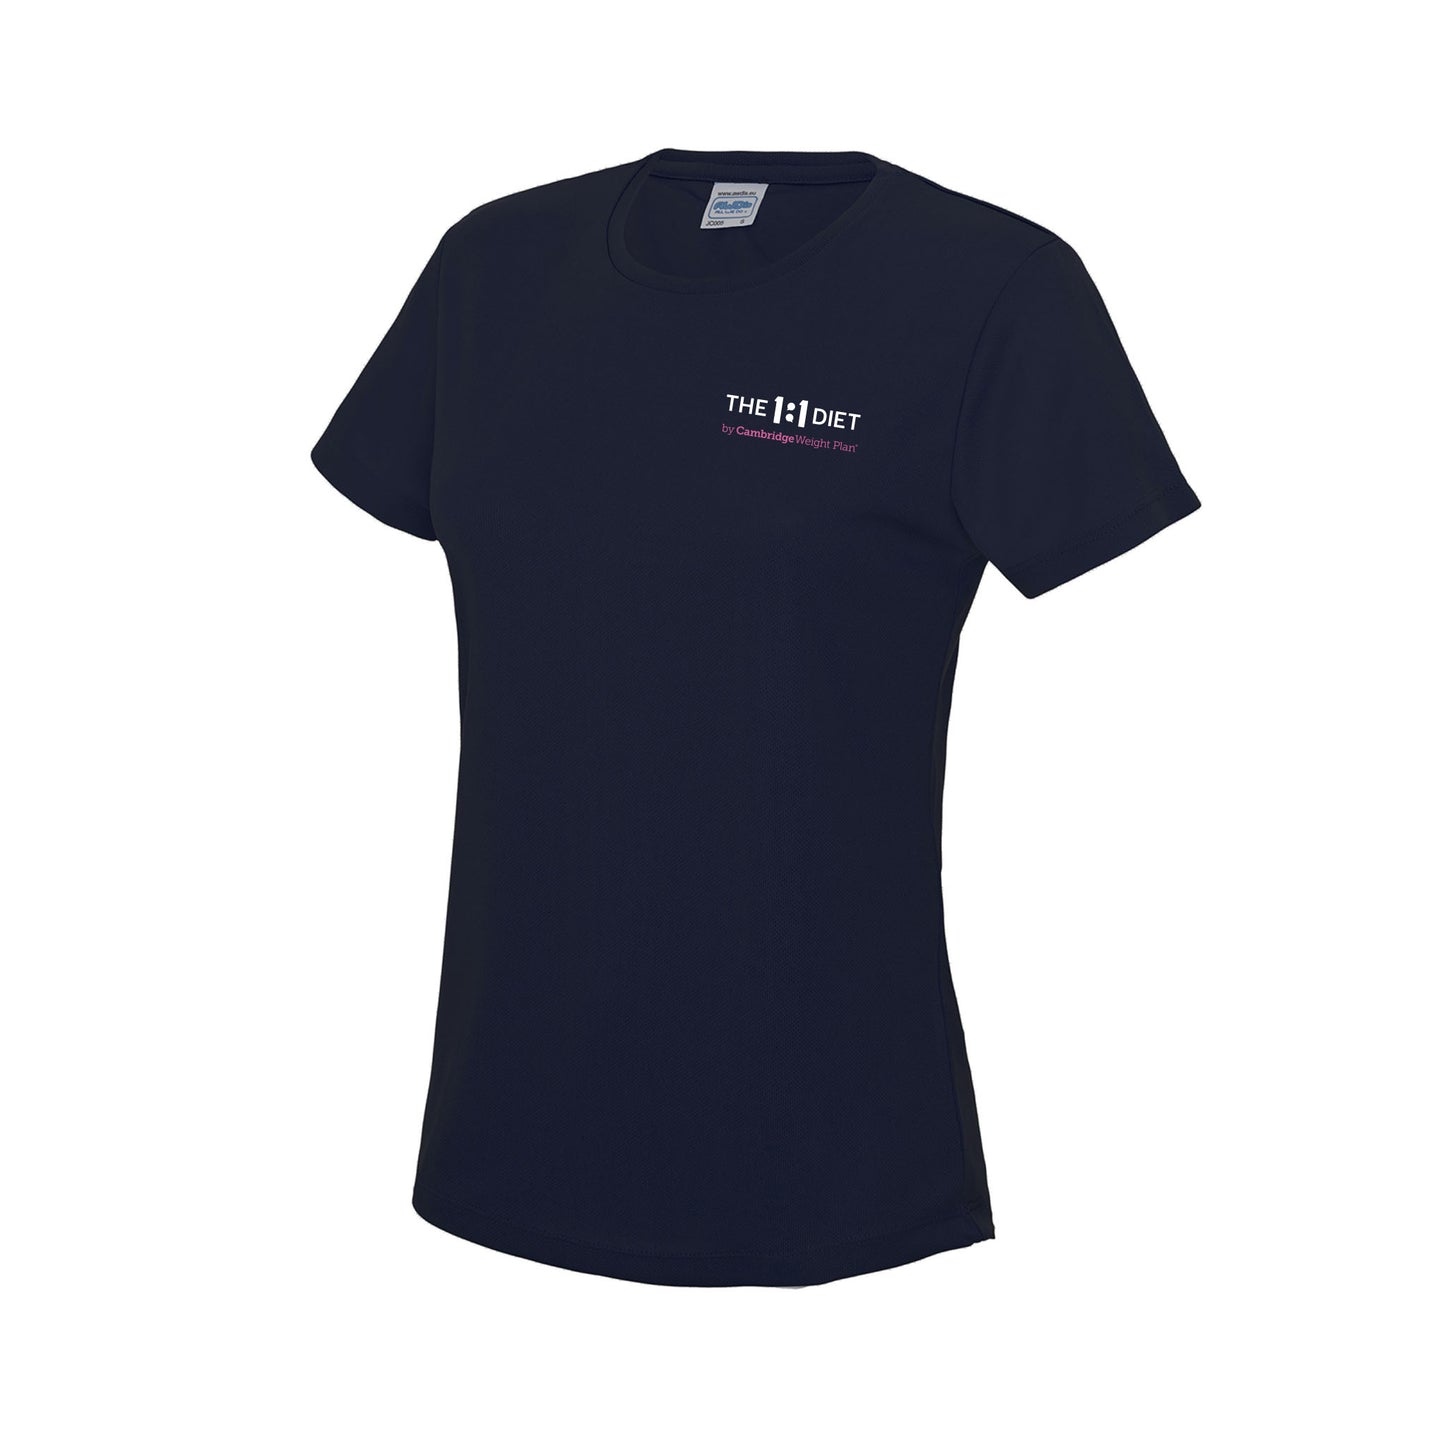 The 1:1 Diet - Ladies Breathable Gym T-Shirt